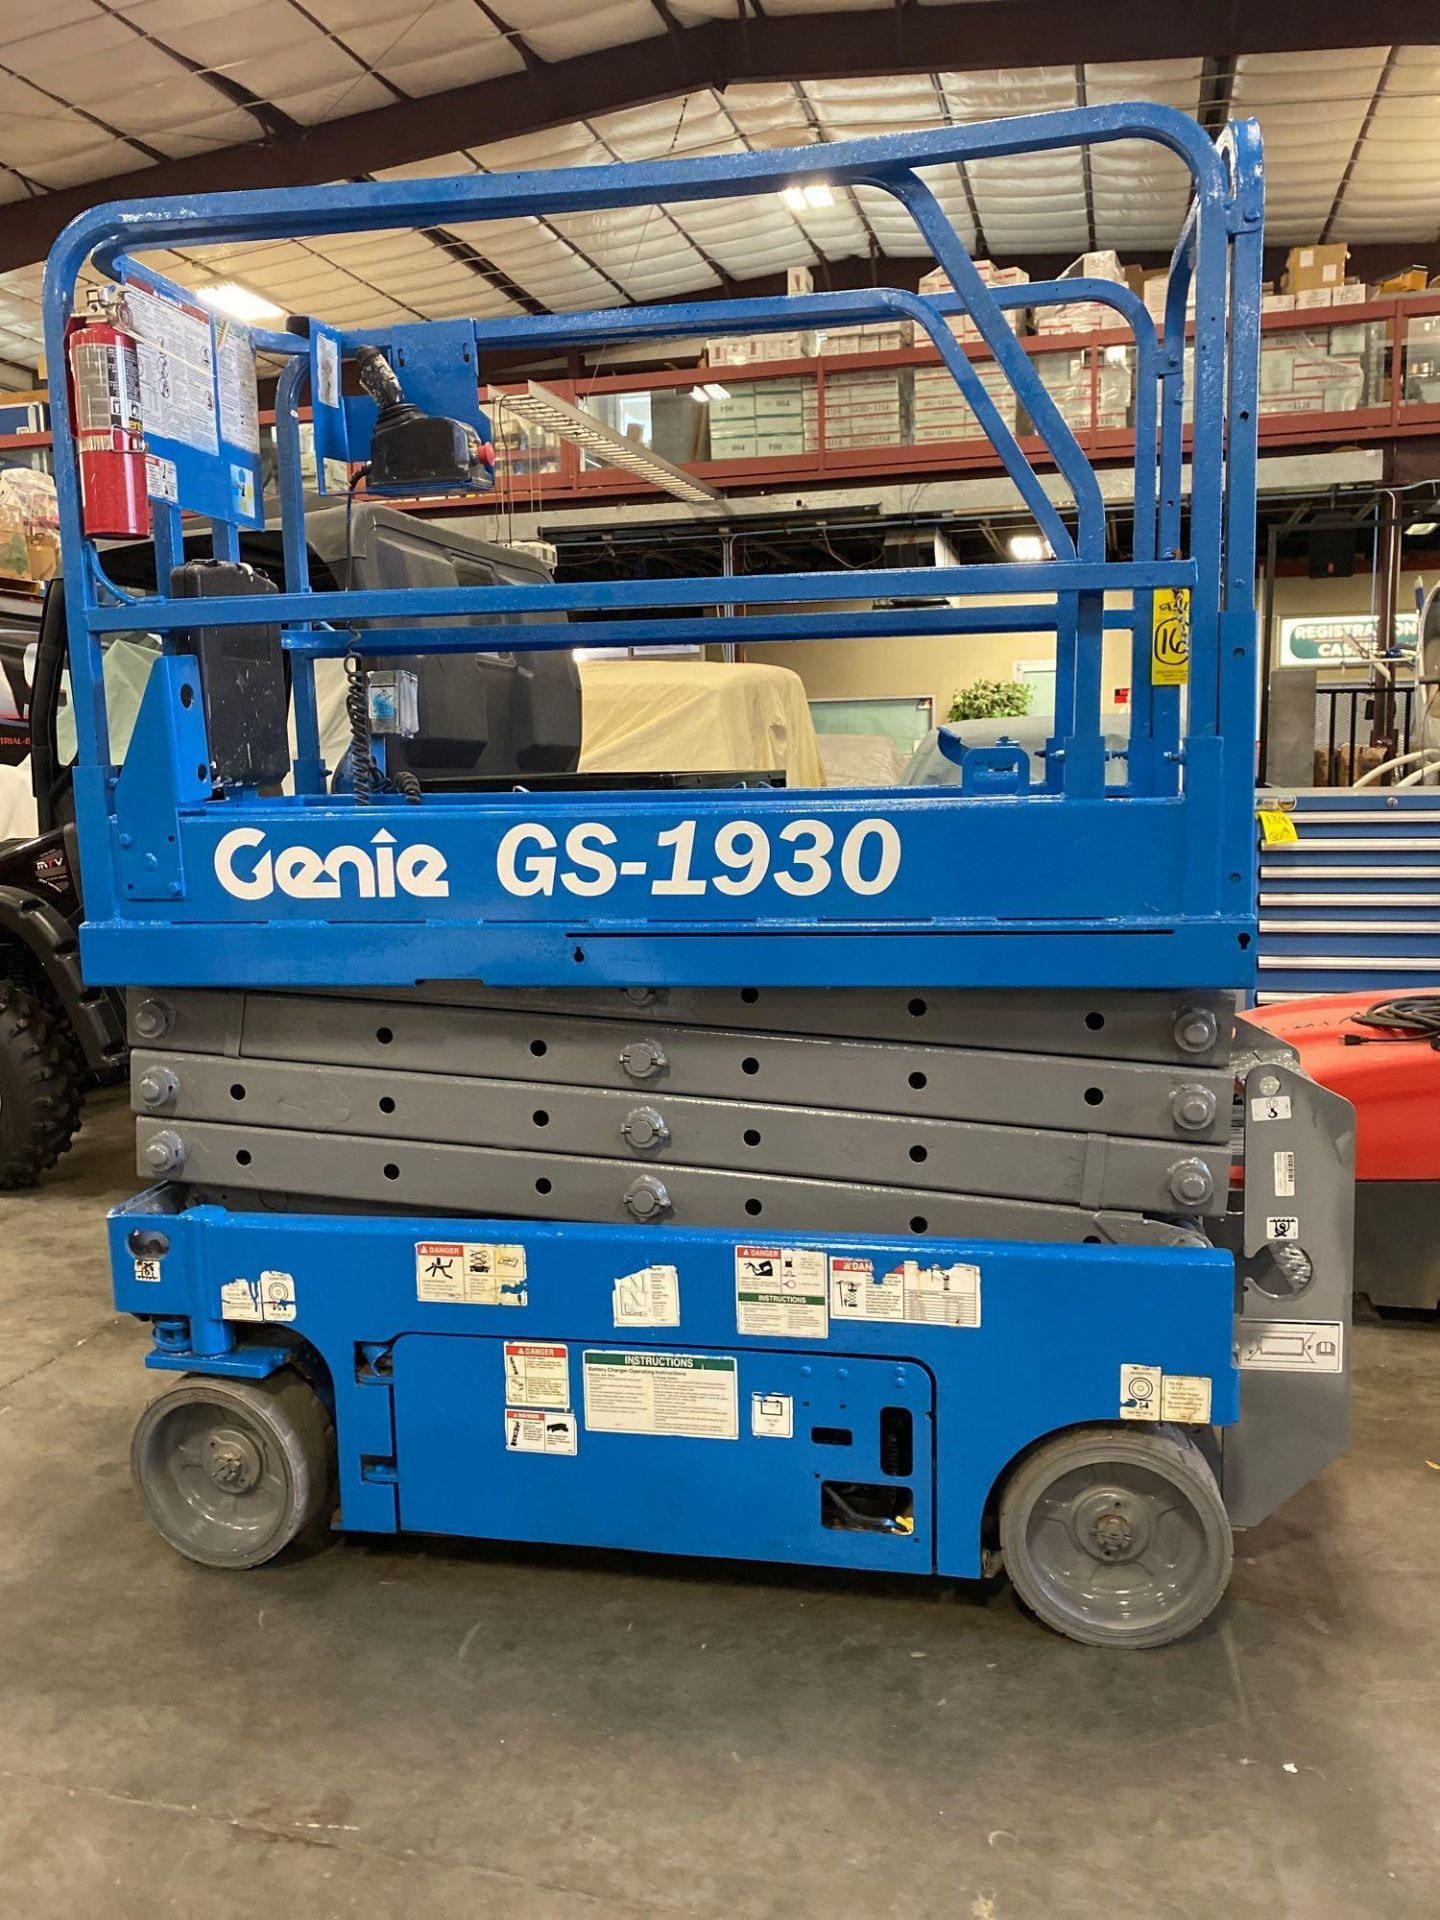 GENIE GS1930 SCISSOR LIFT, SELF PROPELLED, 19' PLATFORM HEIGHT, BUILT IN BATTERY CHARGER, - Image 4 of 8